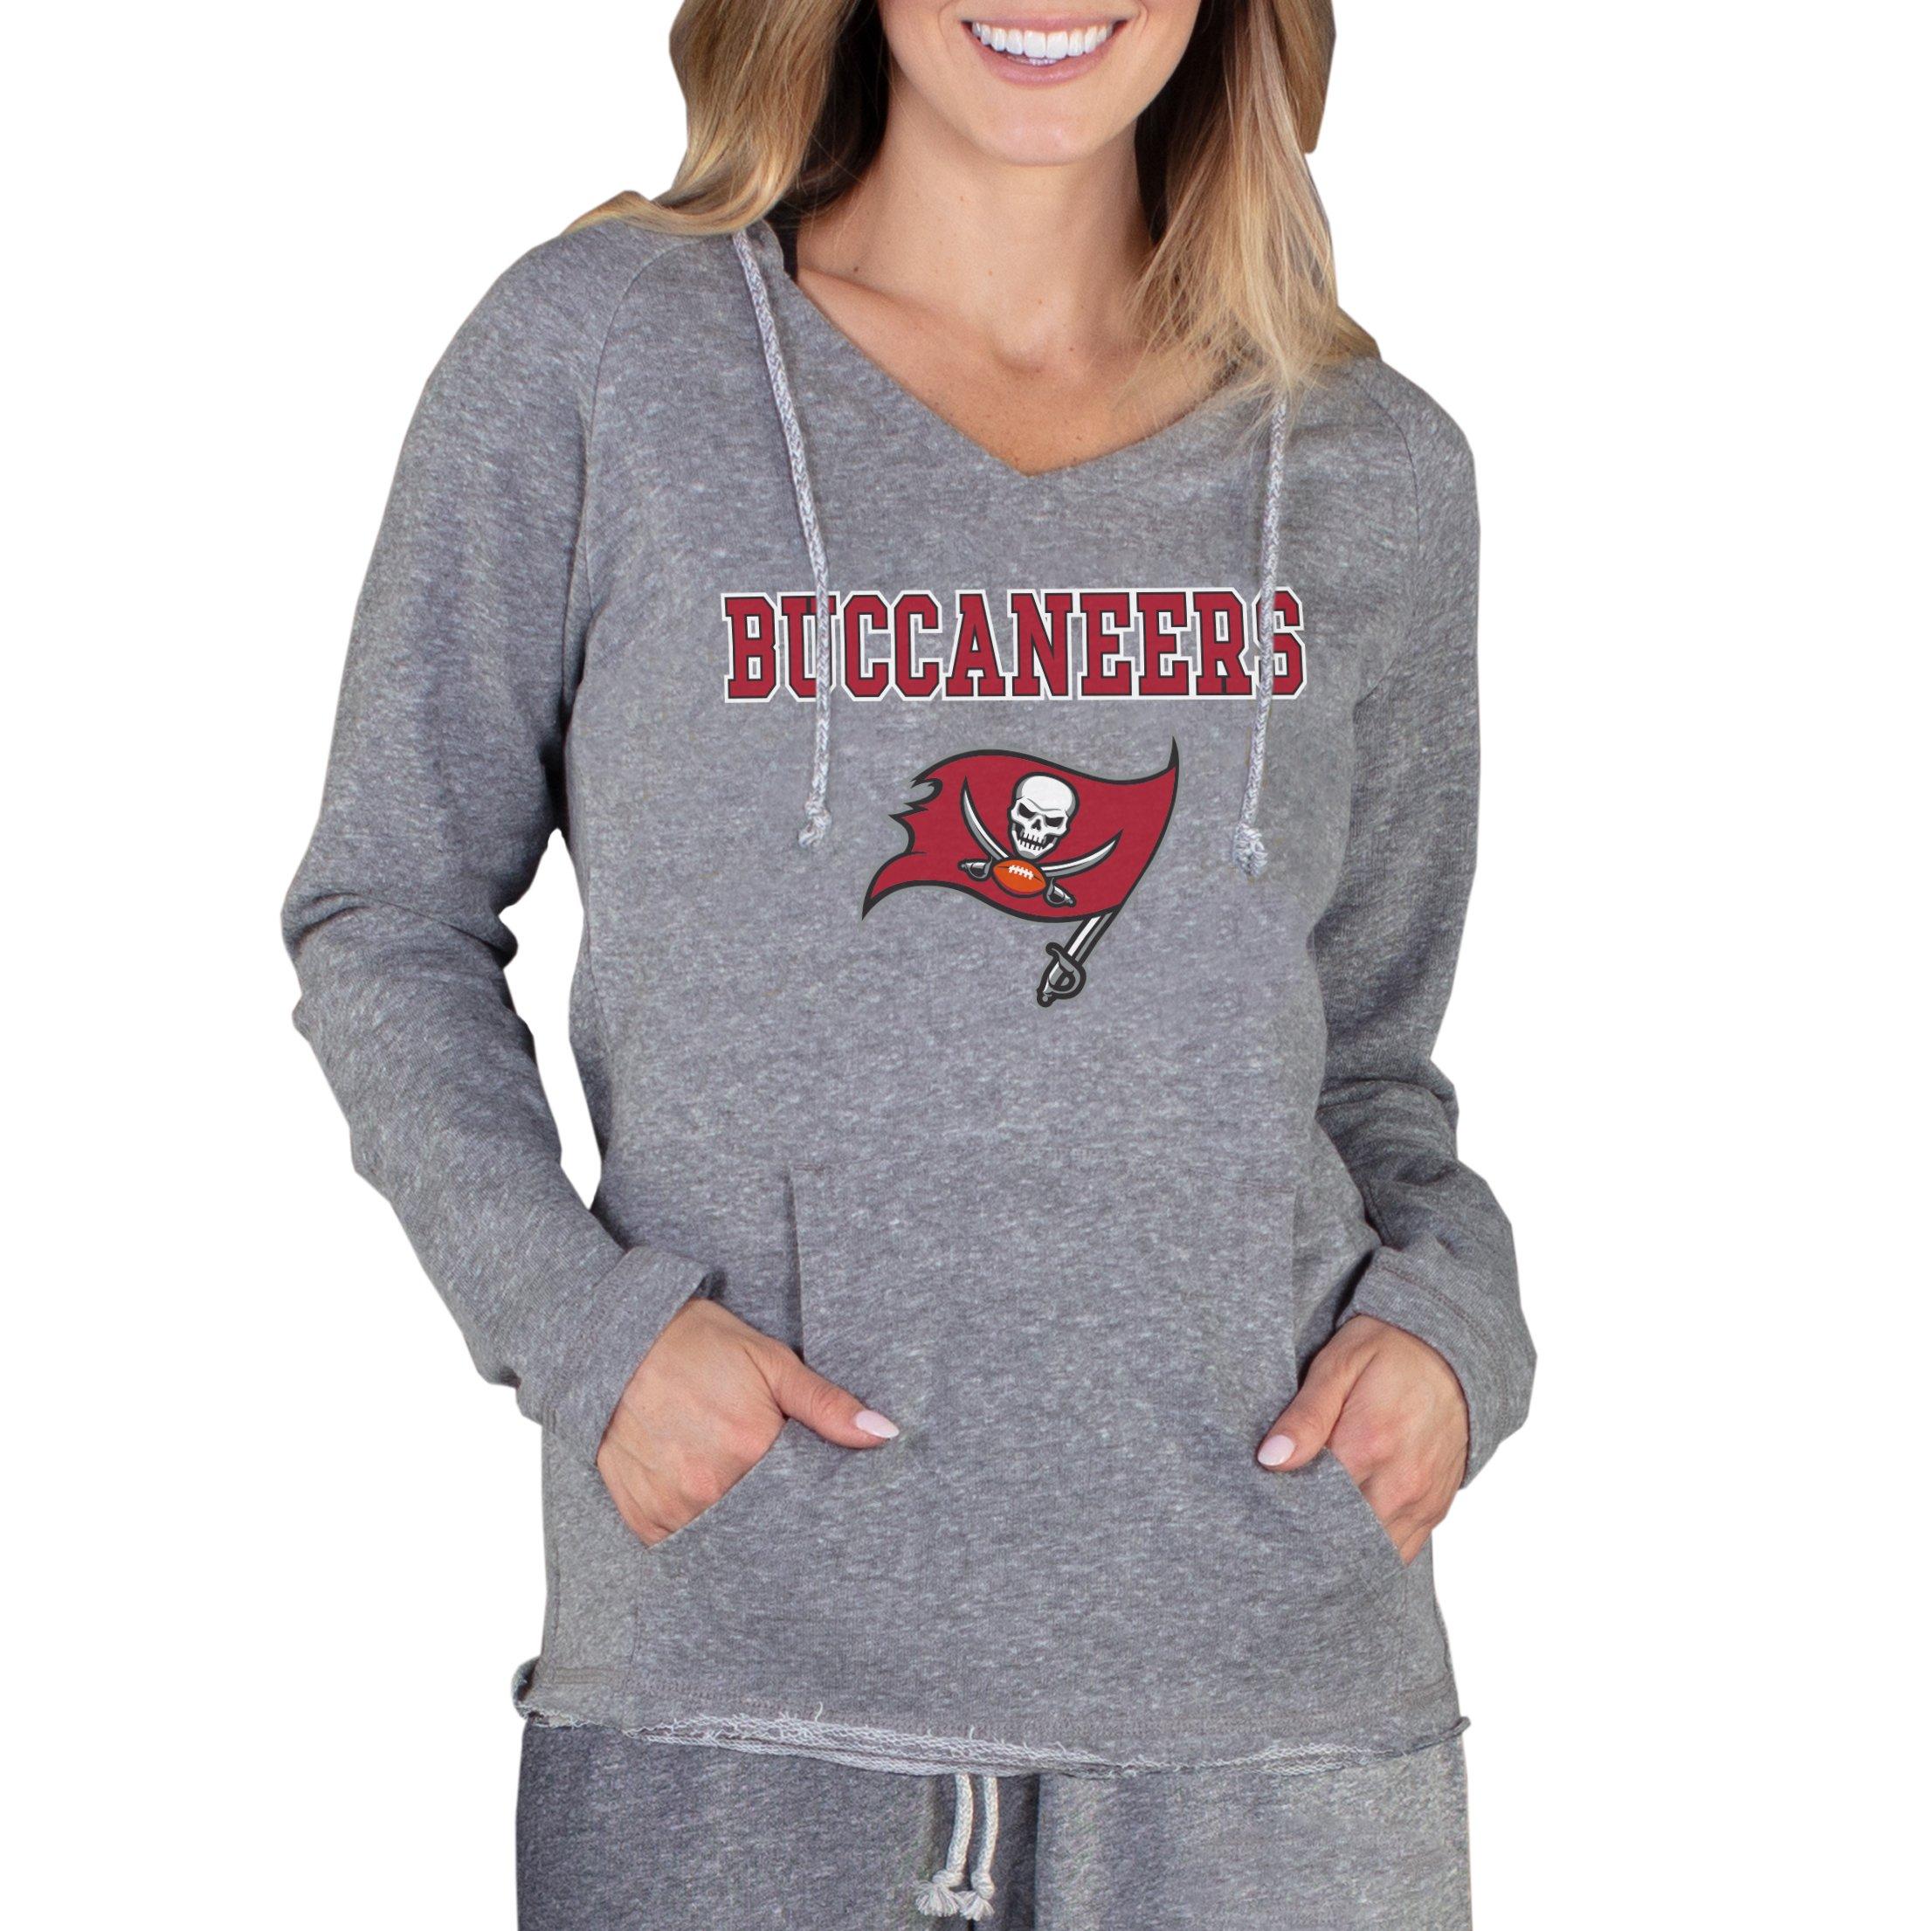 College Concepts Women's Tampa Bay Buccaneers Mainstream Hooded Top